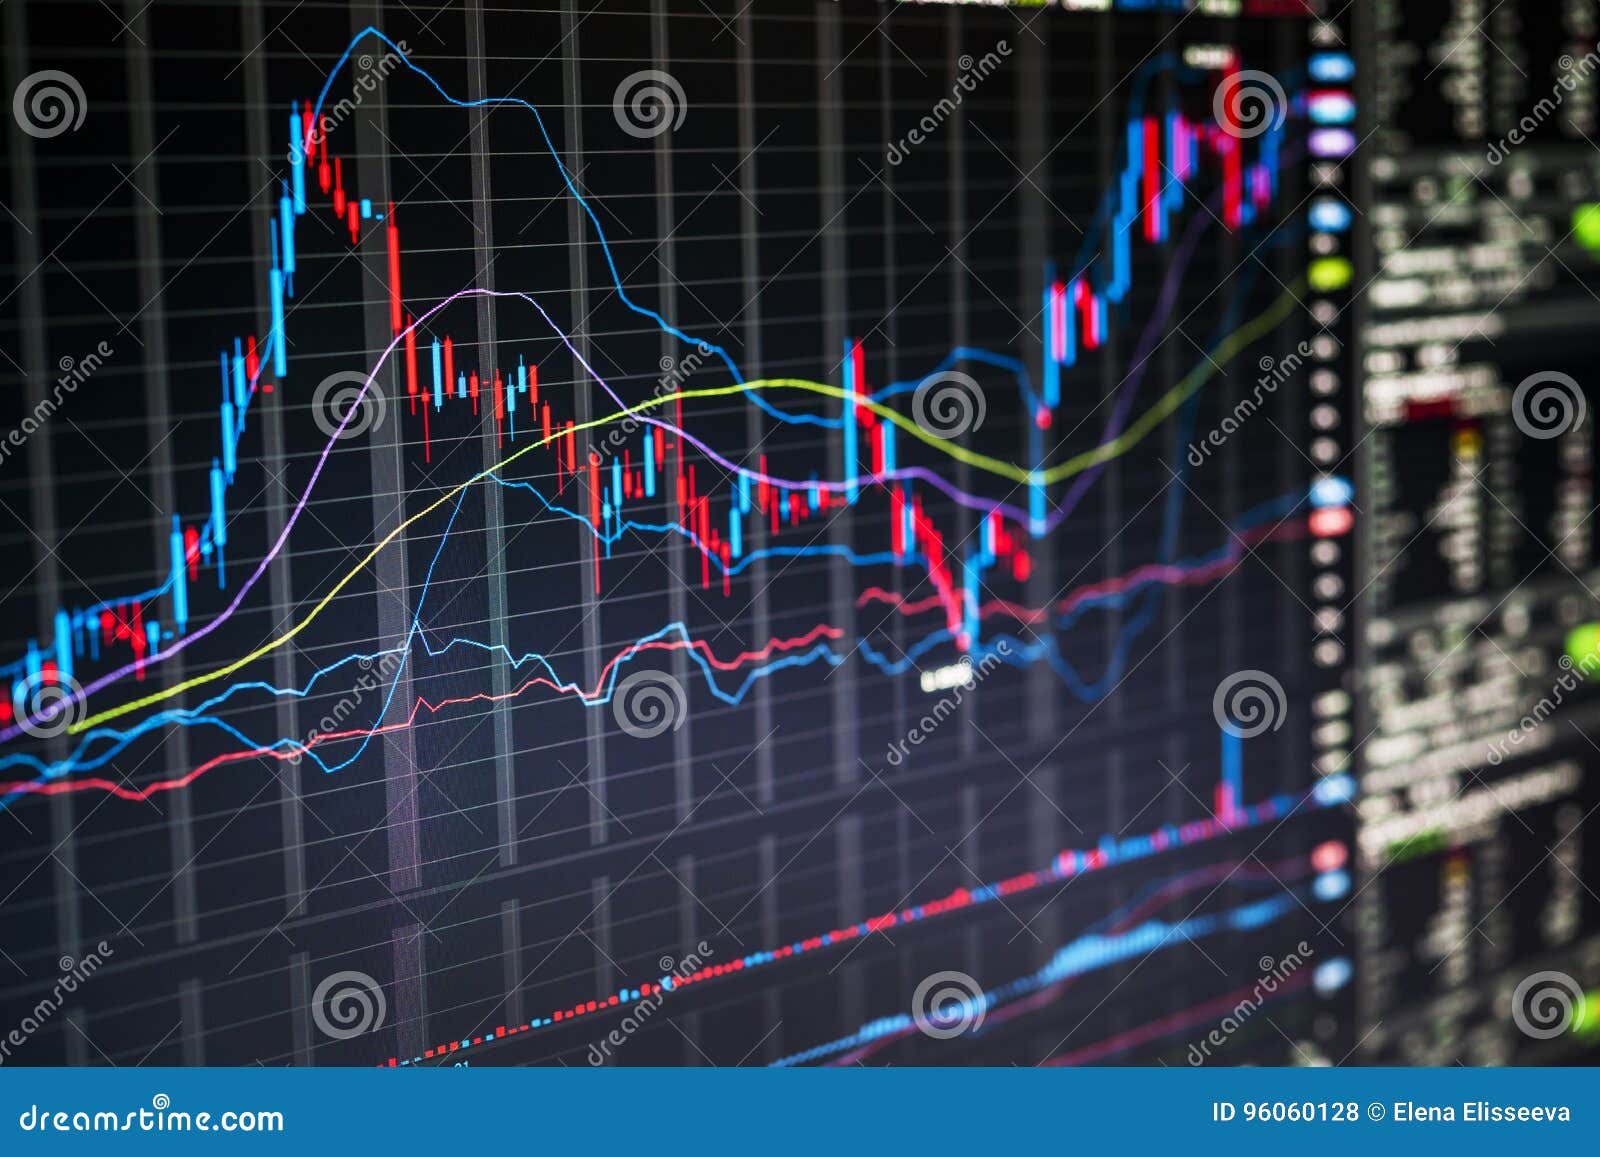 Trading screen stock photo. Image of charts, investing ...